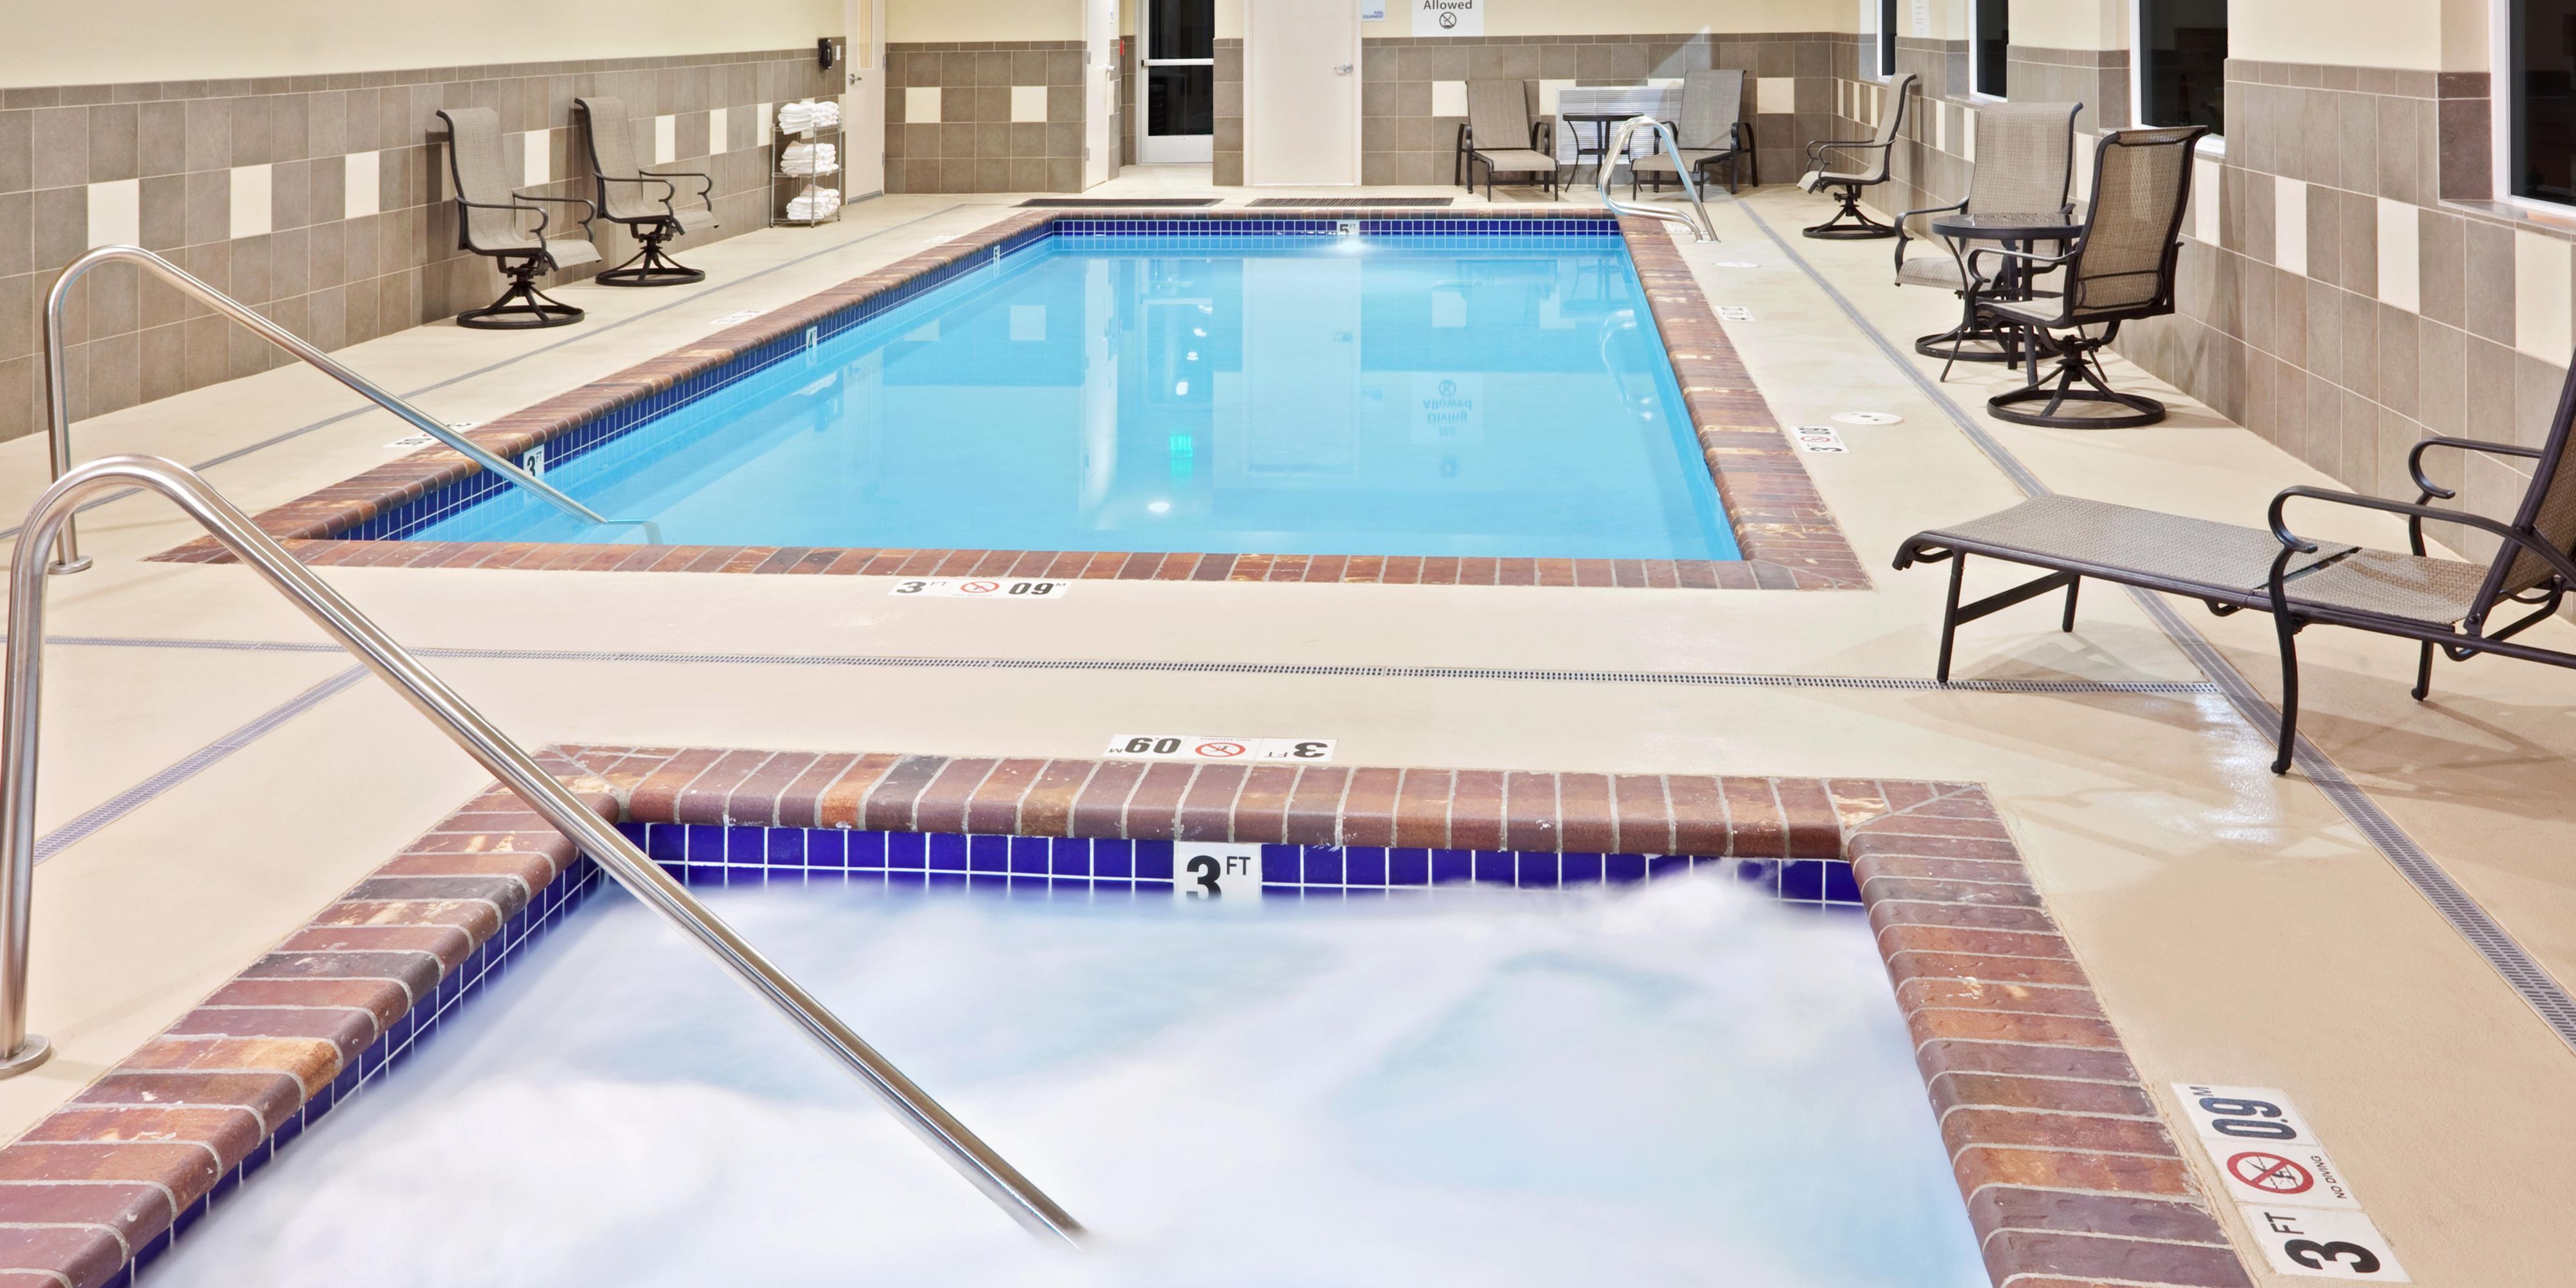 Relax in our heated indoor pool & Spa. Take a dip in the pool or kick back in the spa after a long day.